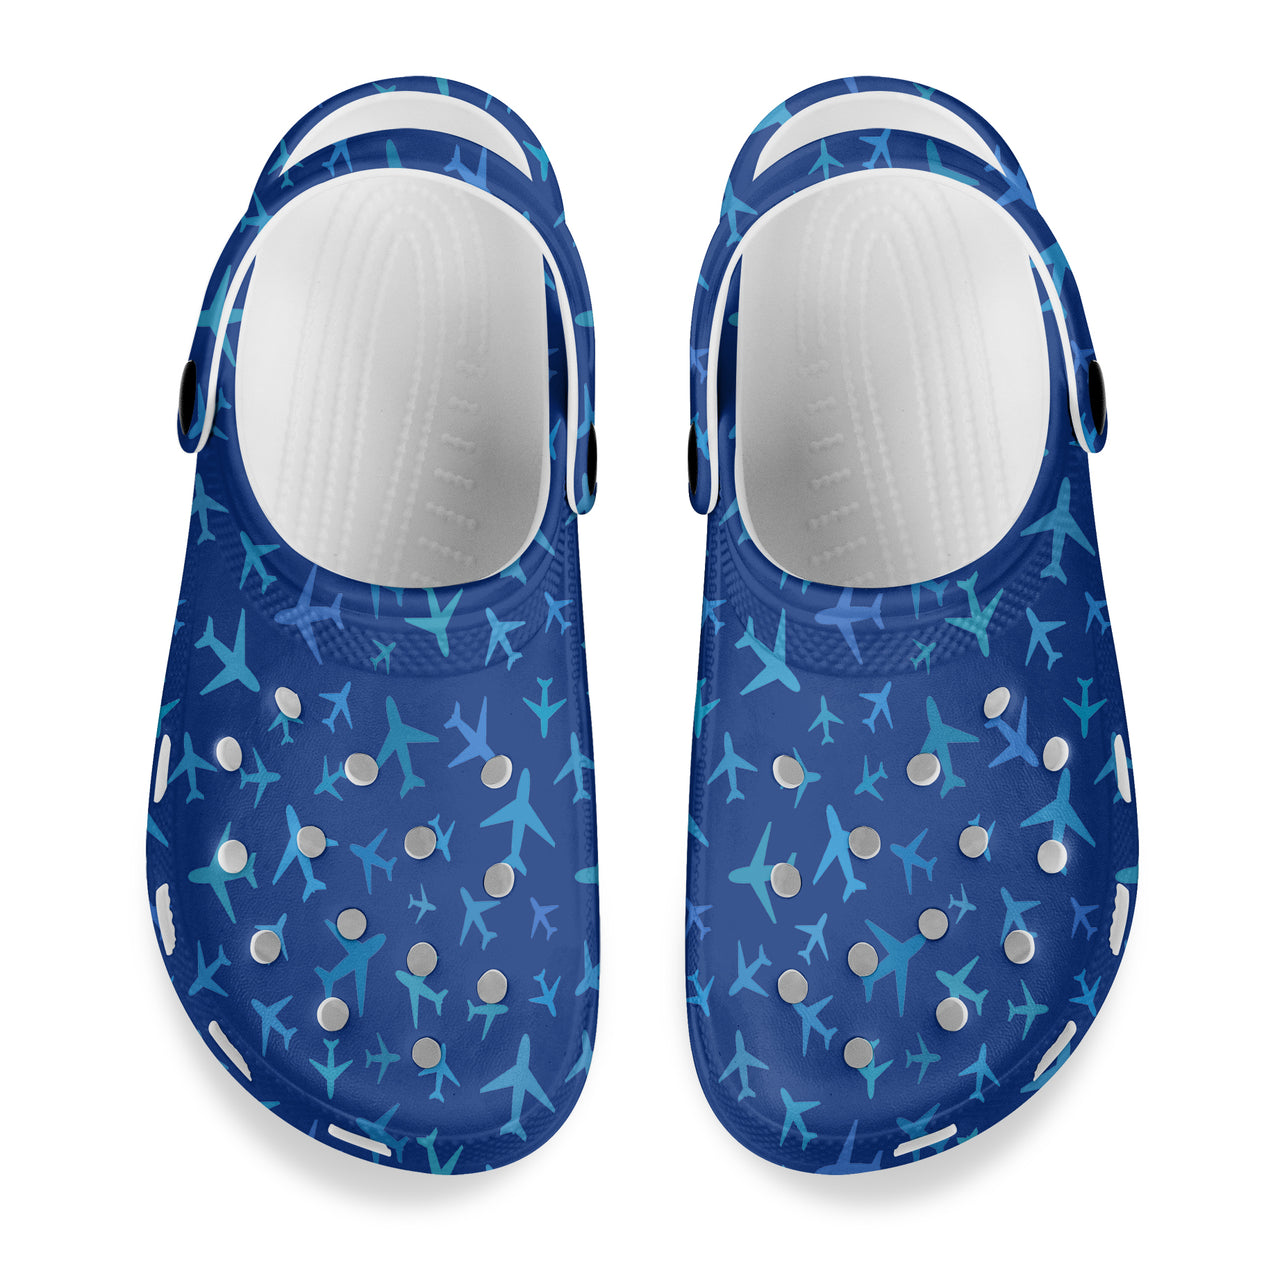 Many Airplanes Blue Designed Hole Shoes & Slippers (WOMEN)